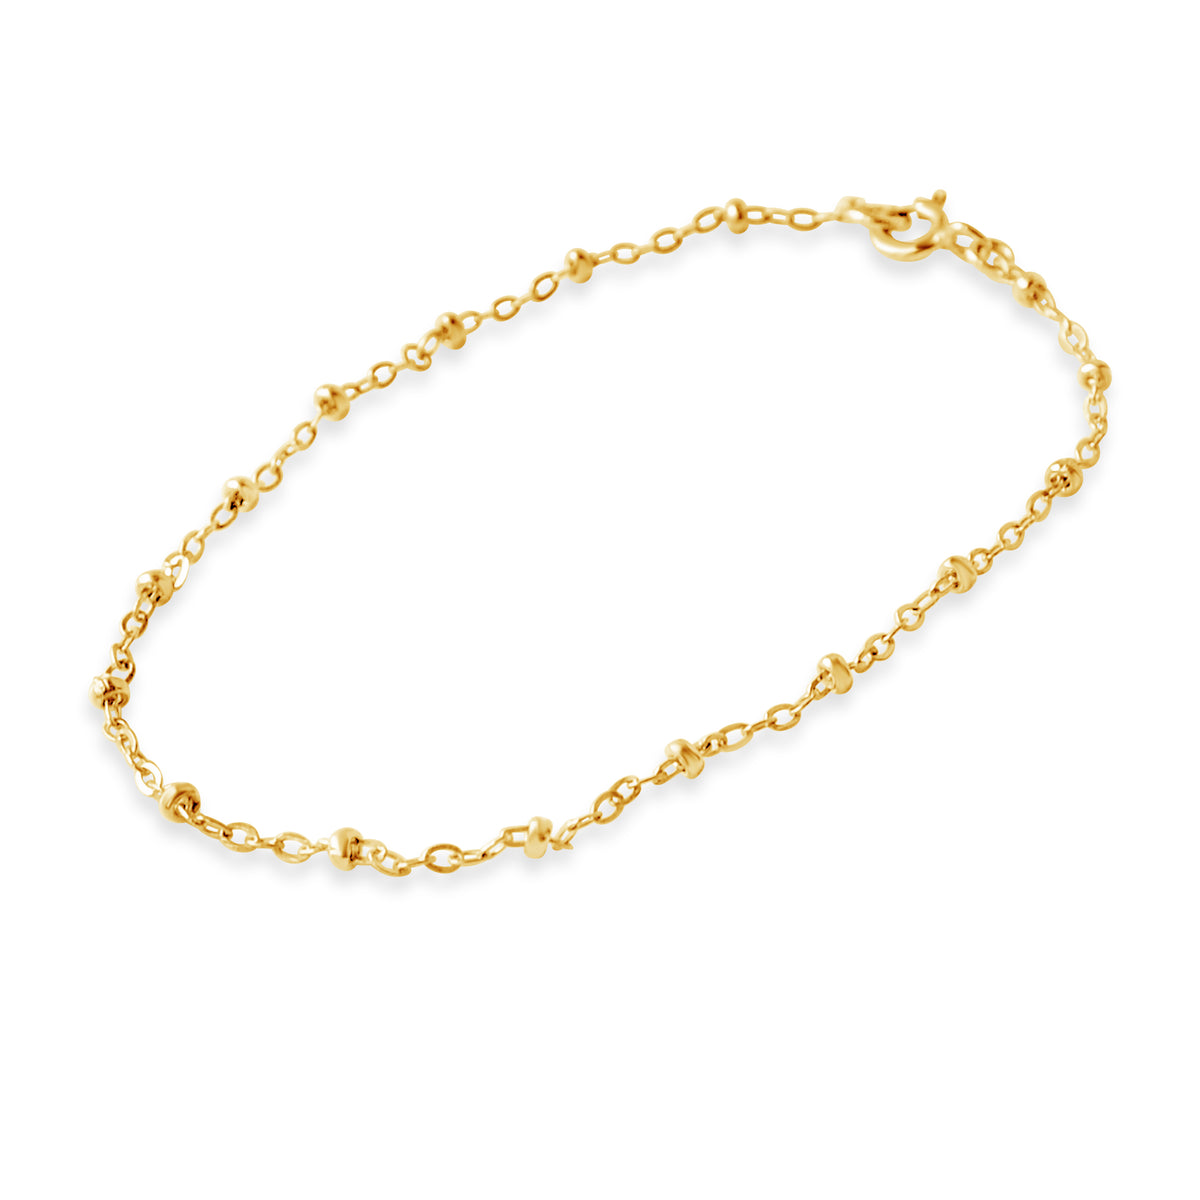 Ball and Chain Bracelet, Gold or Silver